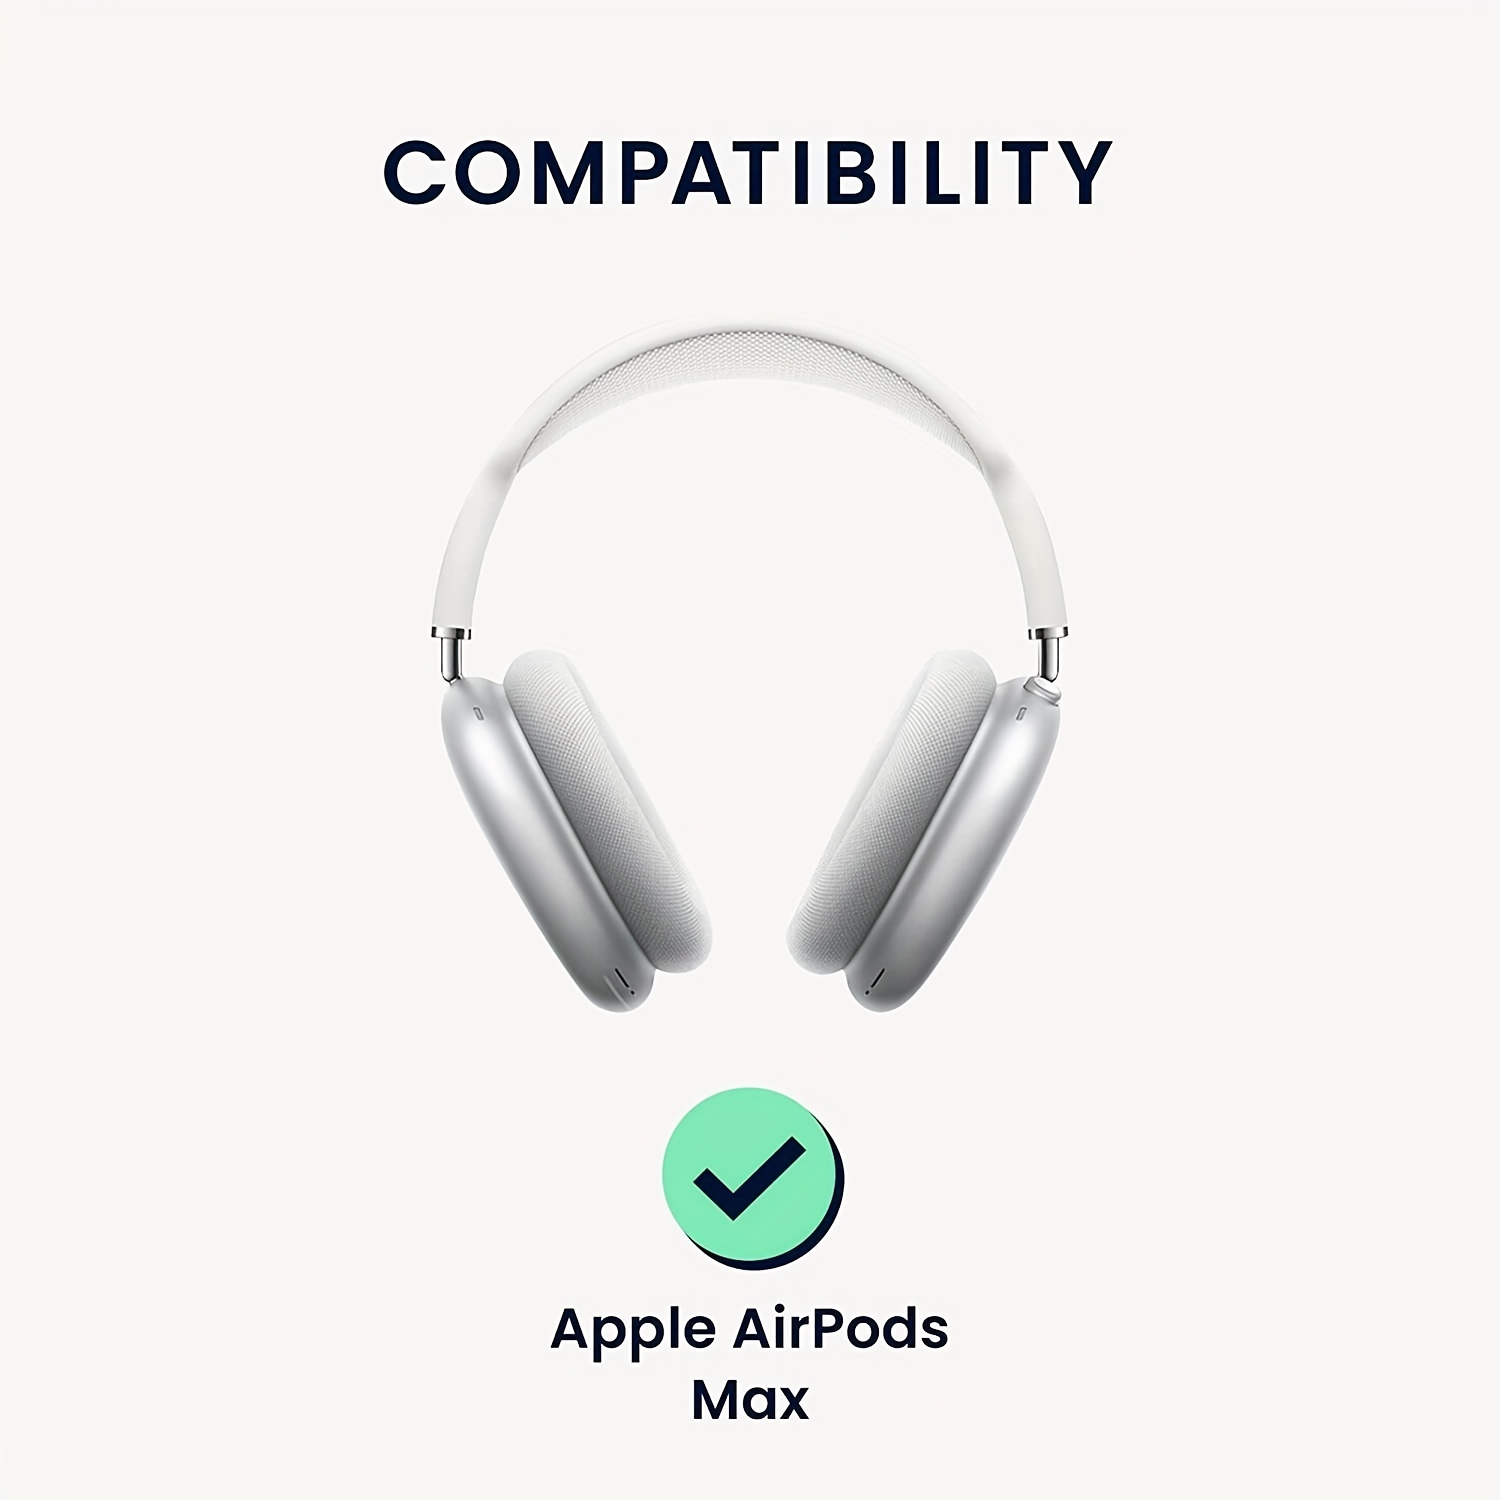 Apple Casques supra-auriculaires Wireless AirPods Max Gris